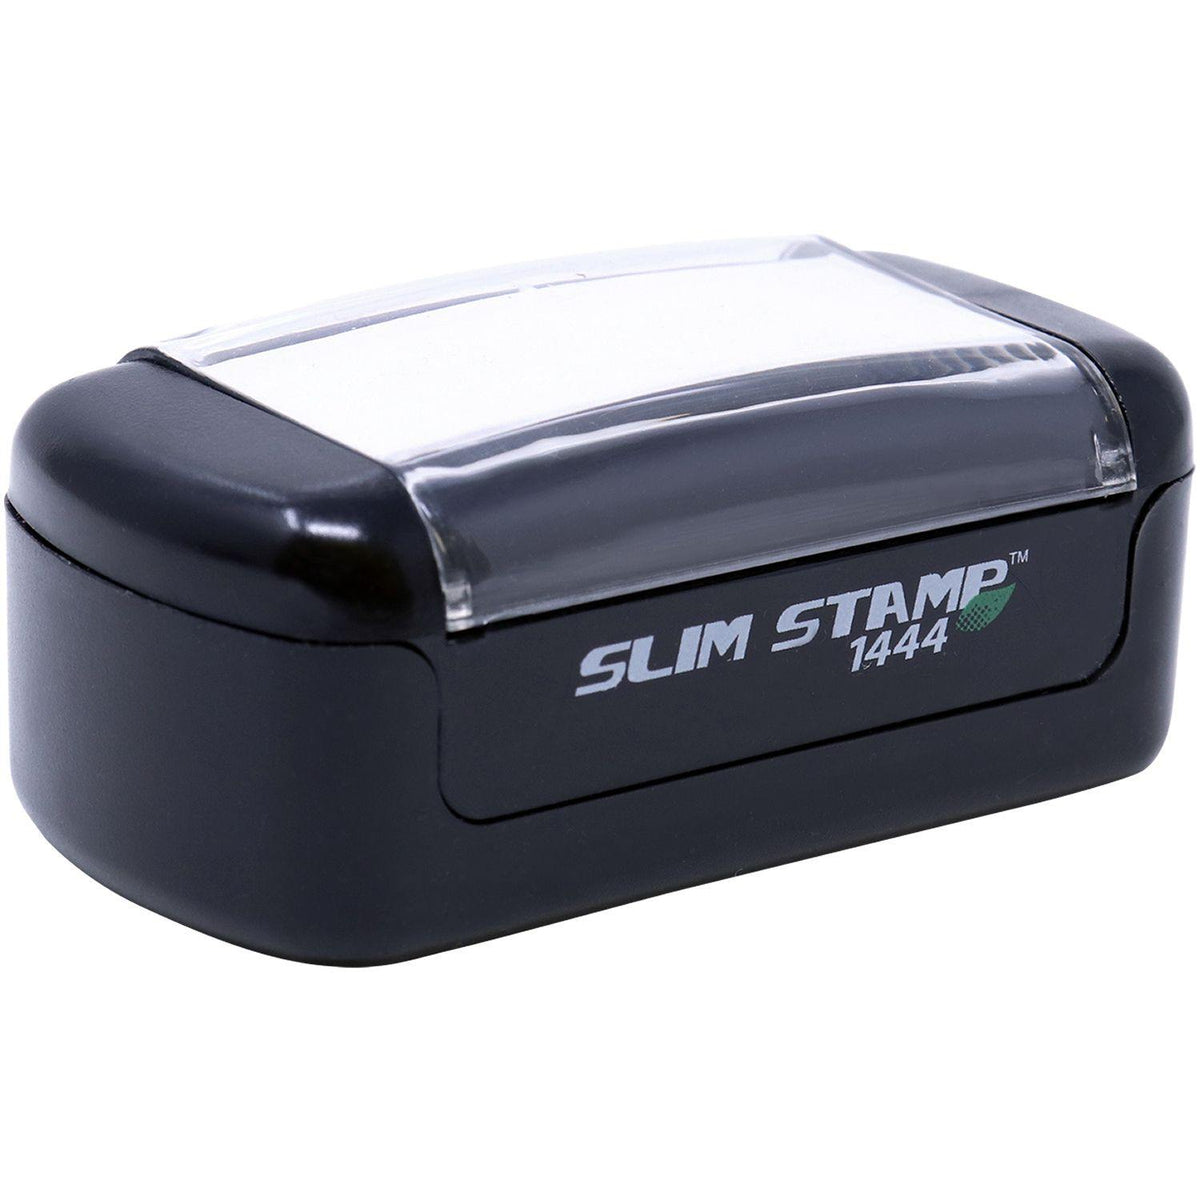 Alt View of Slim Pre-Inked Classified Stamp Mount Angle